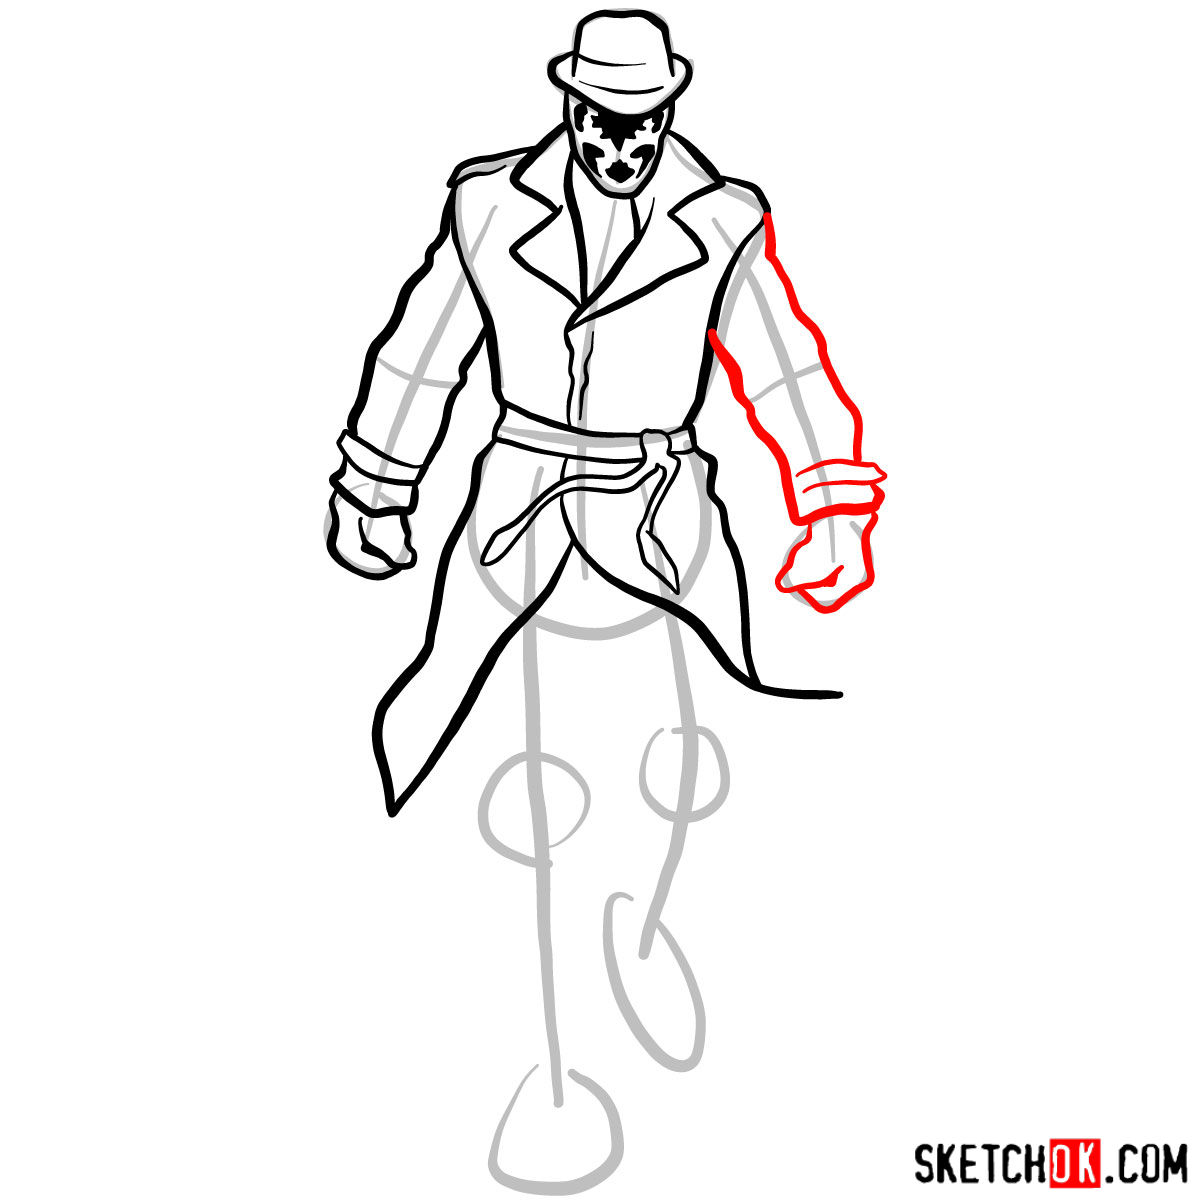 How to draw Rorschach from Watchmen - step 08